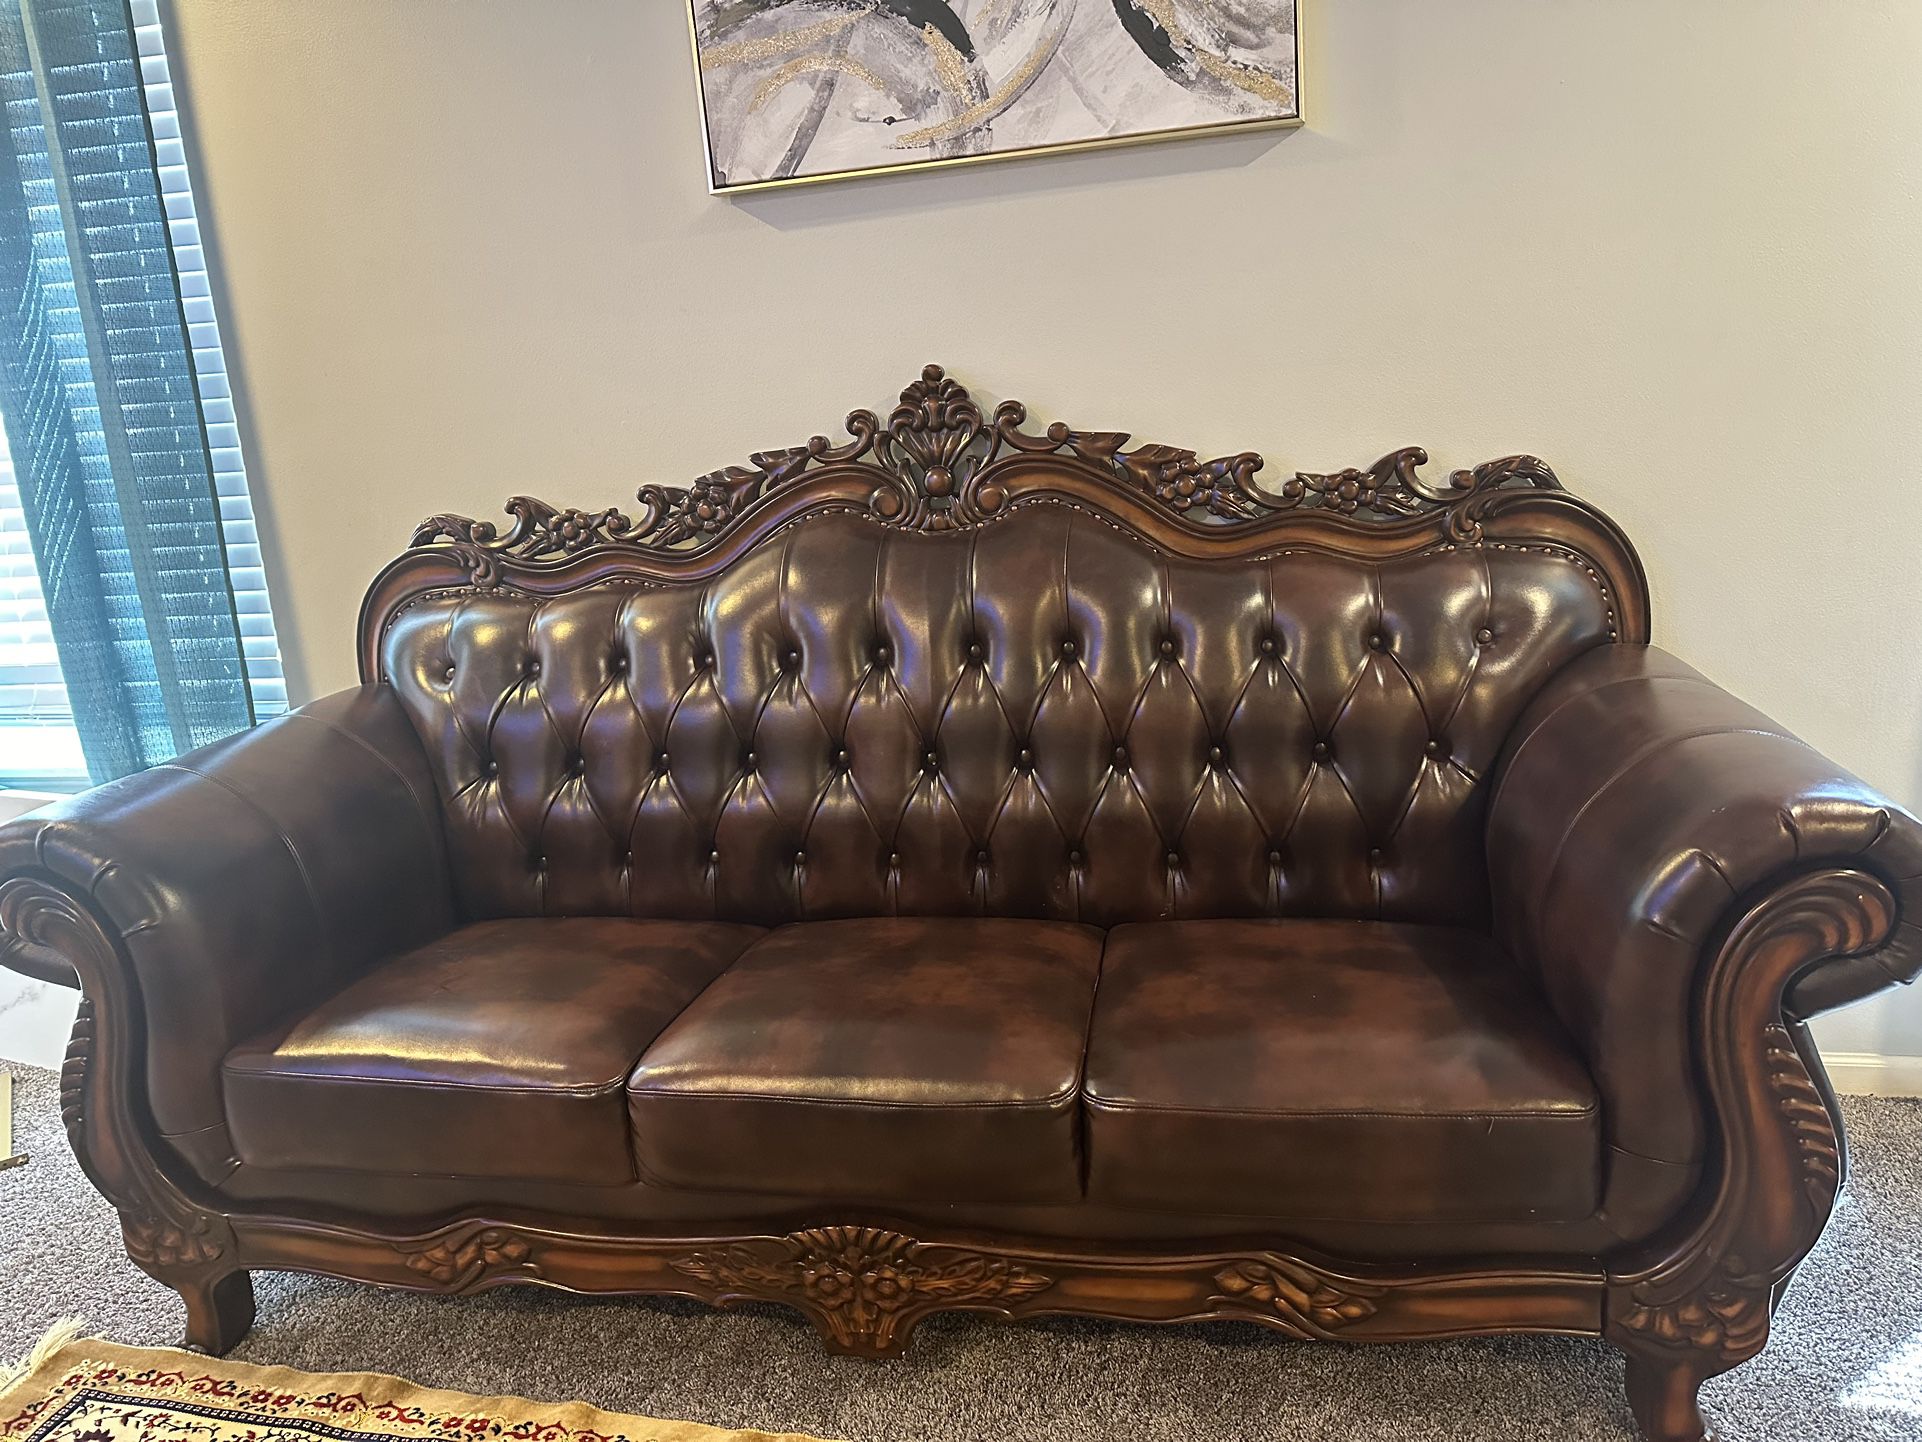 Beautiful Brown Leather Sofas 2 Piece 